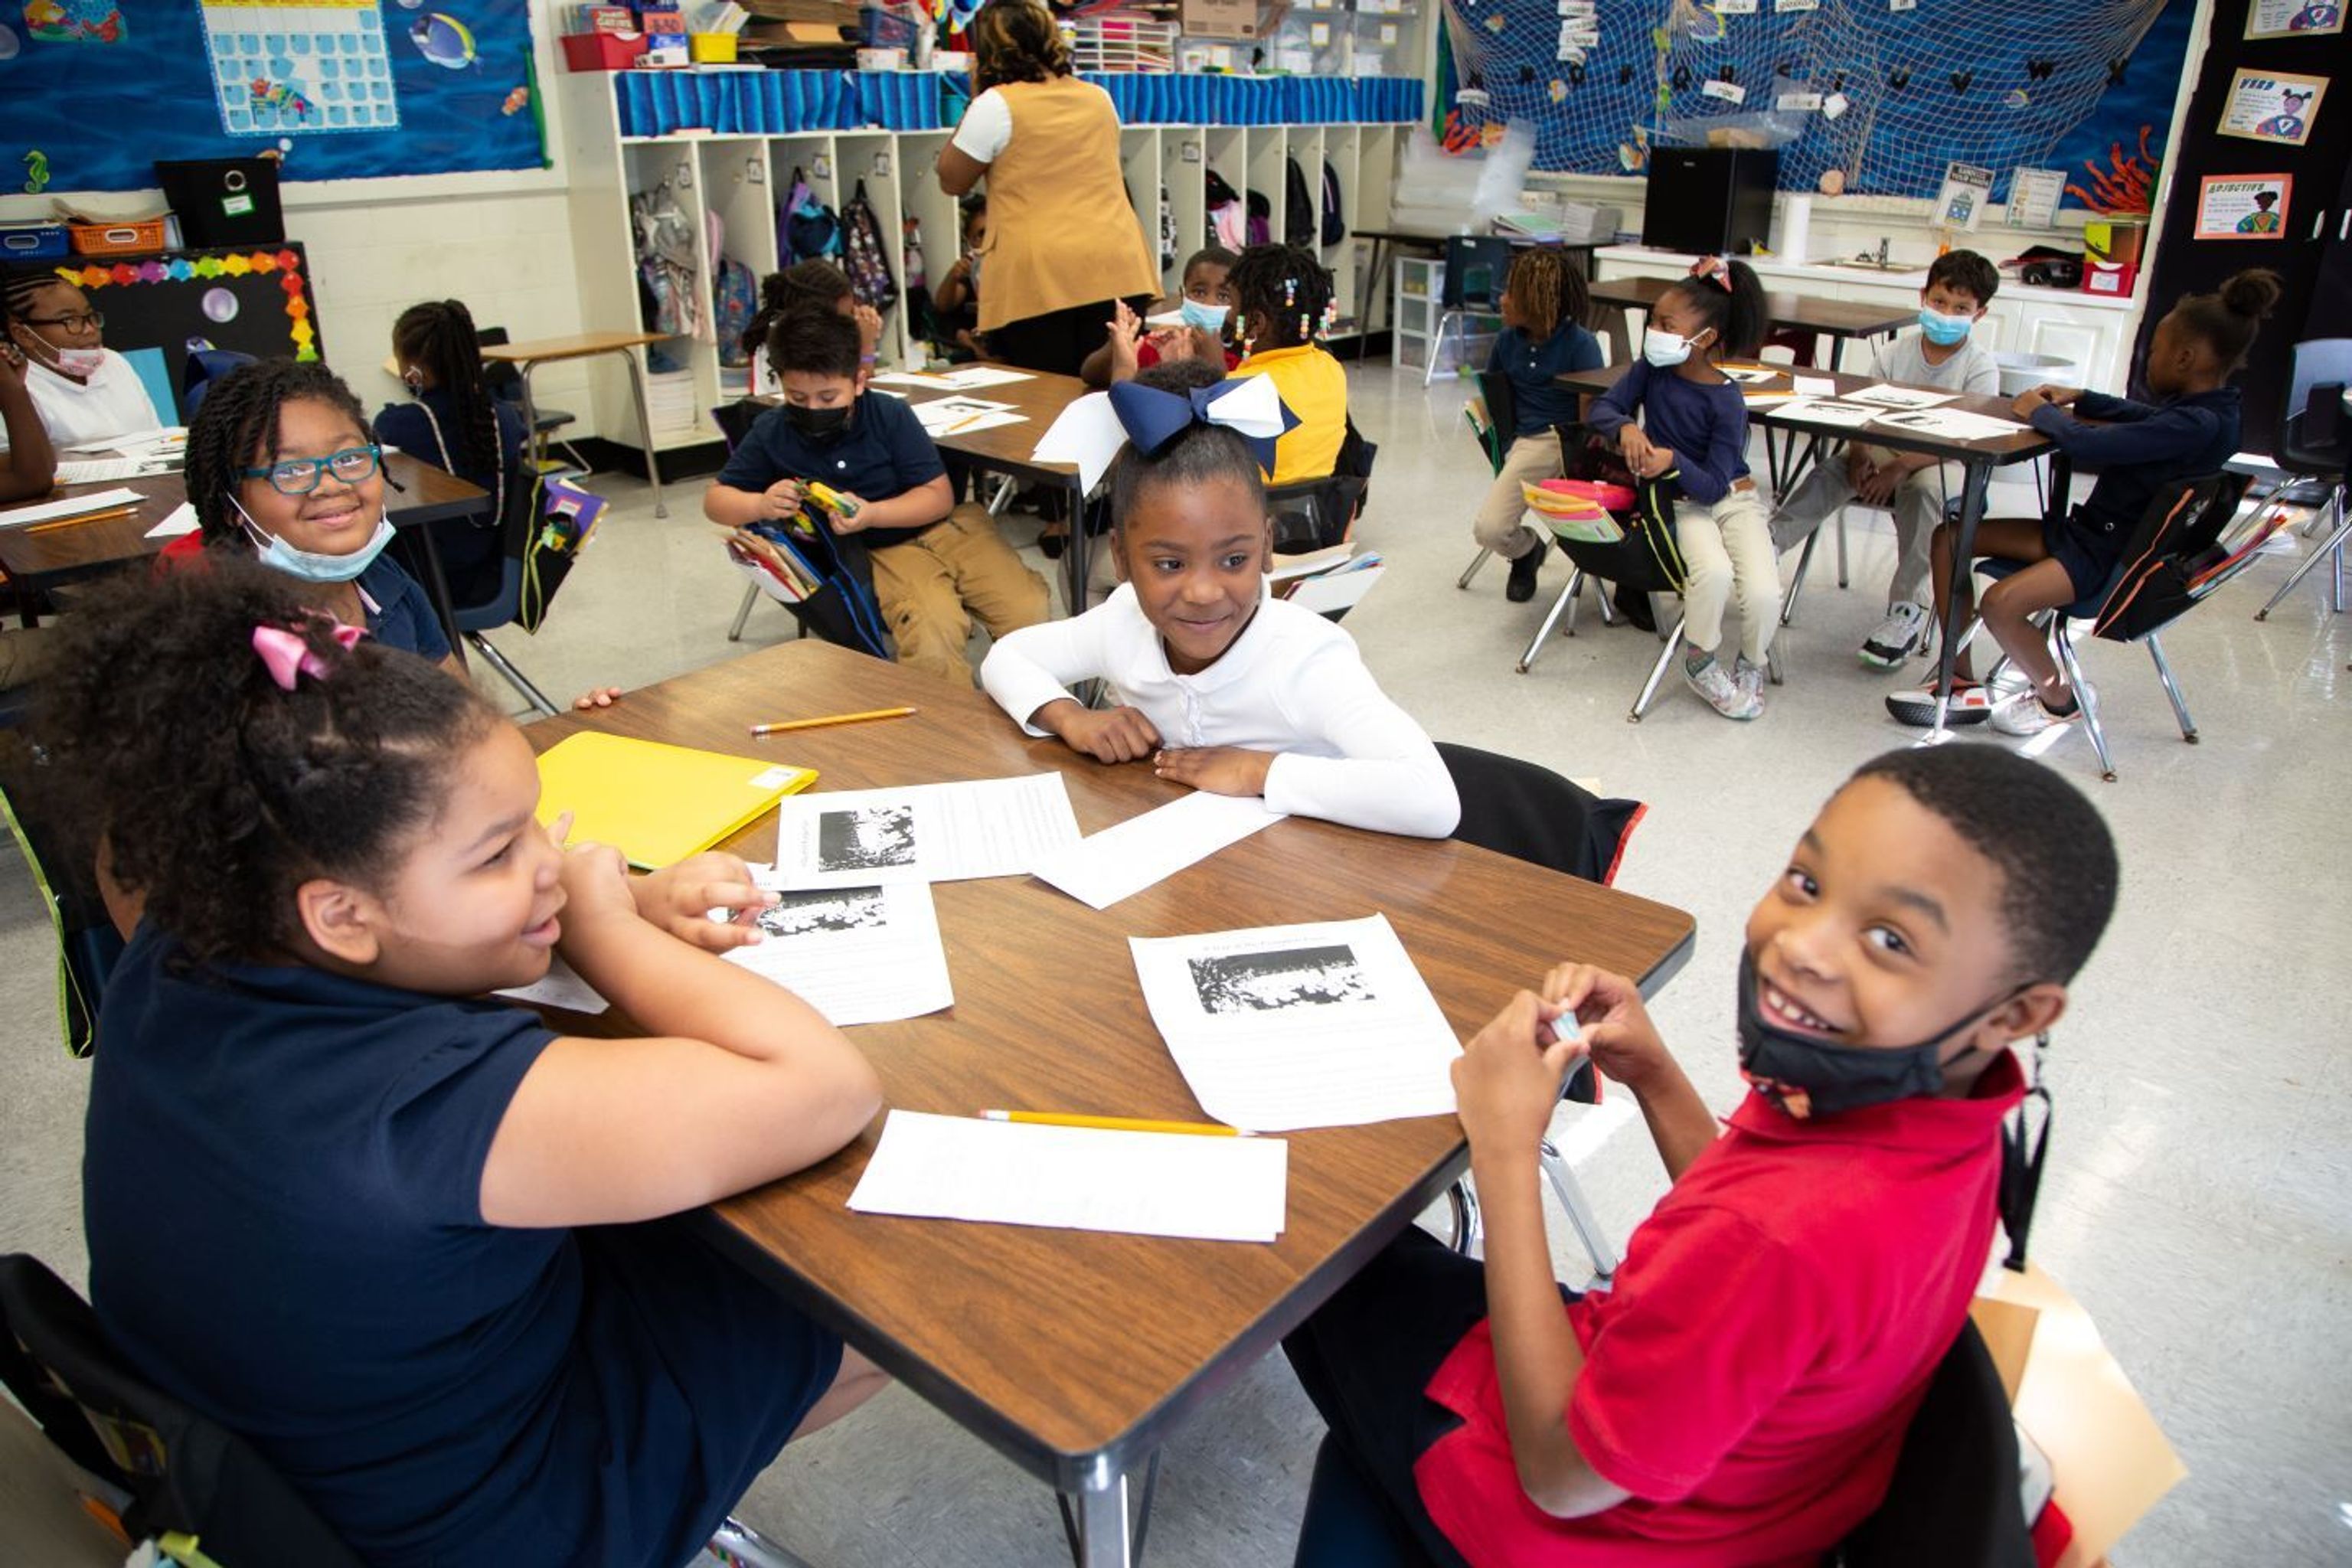 Black students working in the classroom